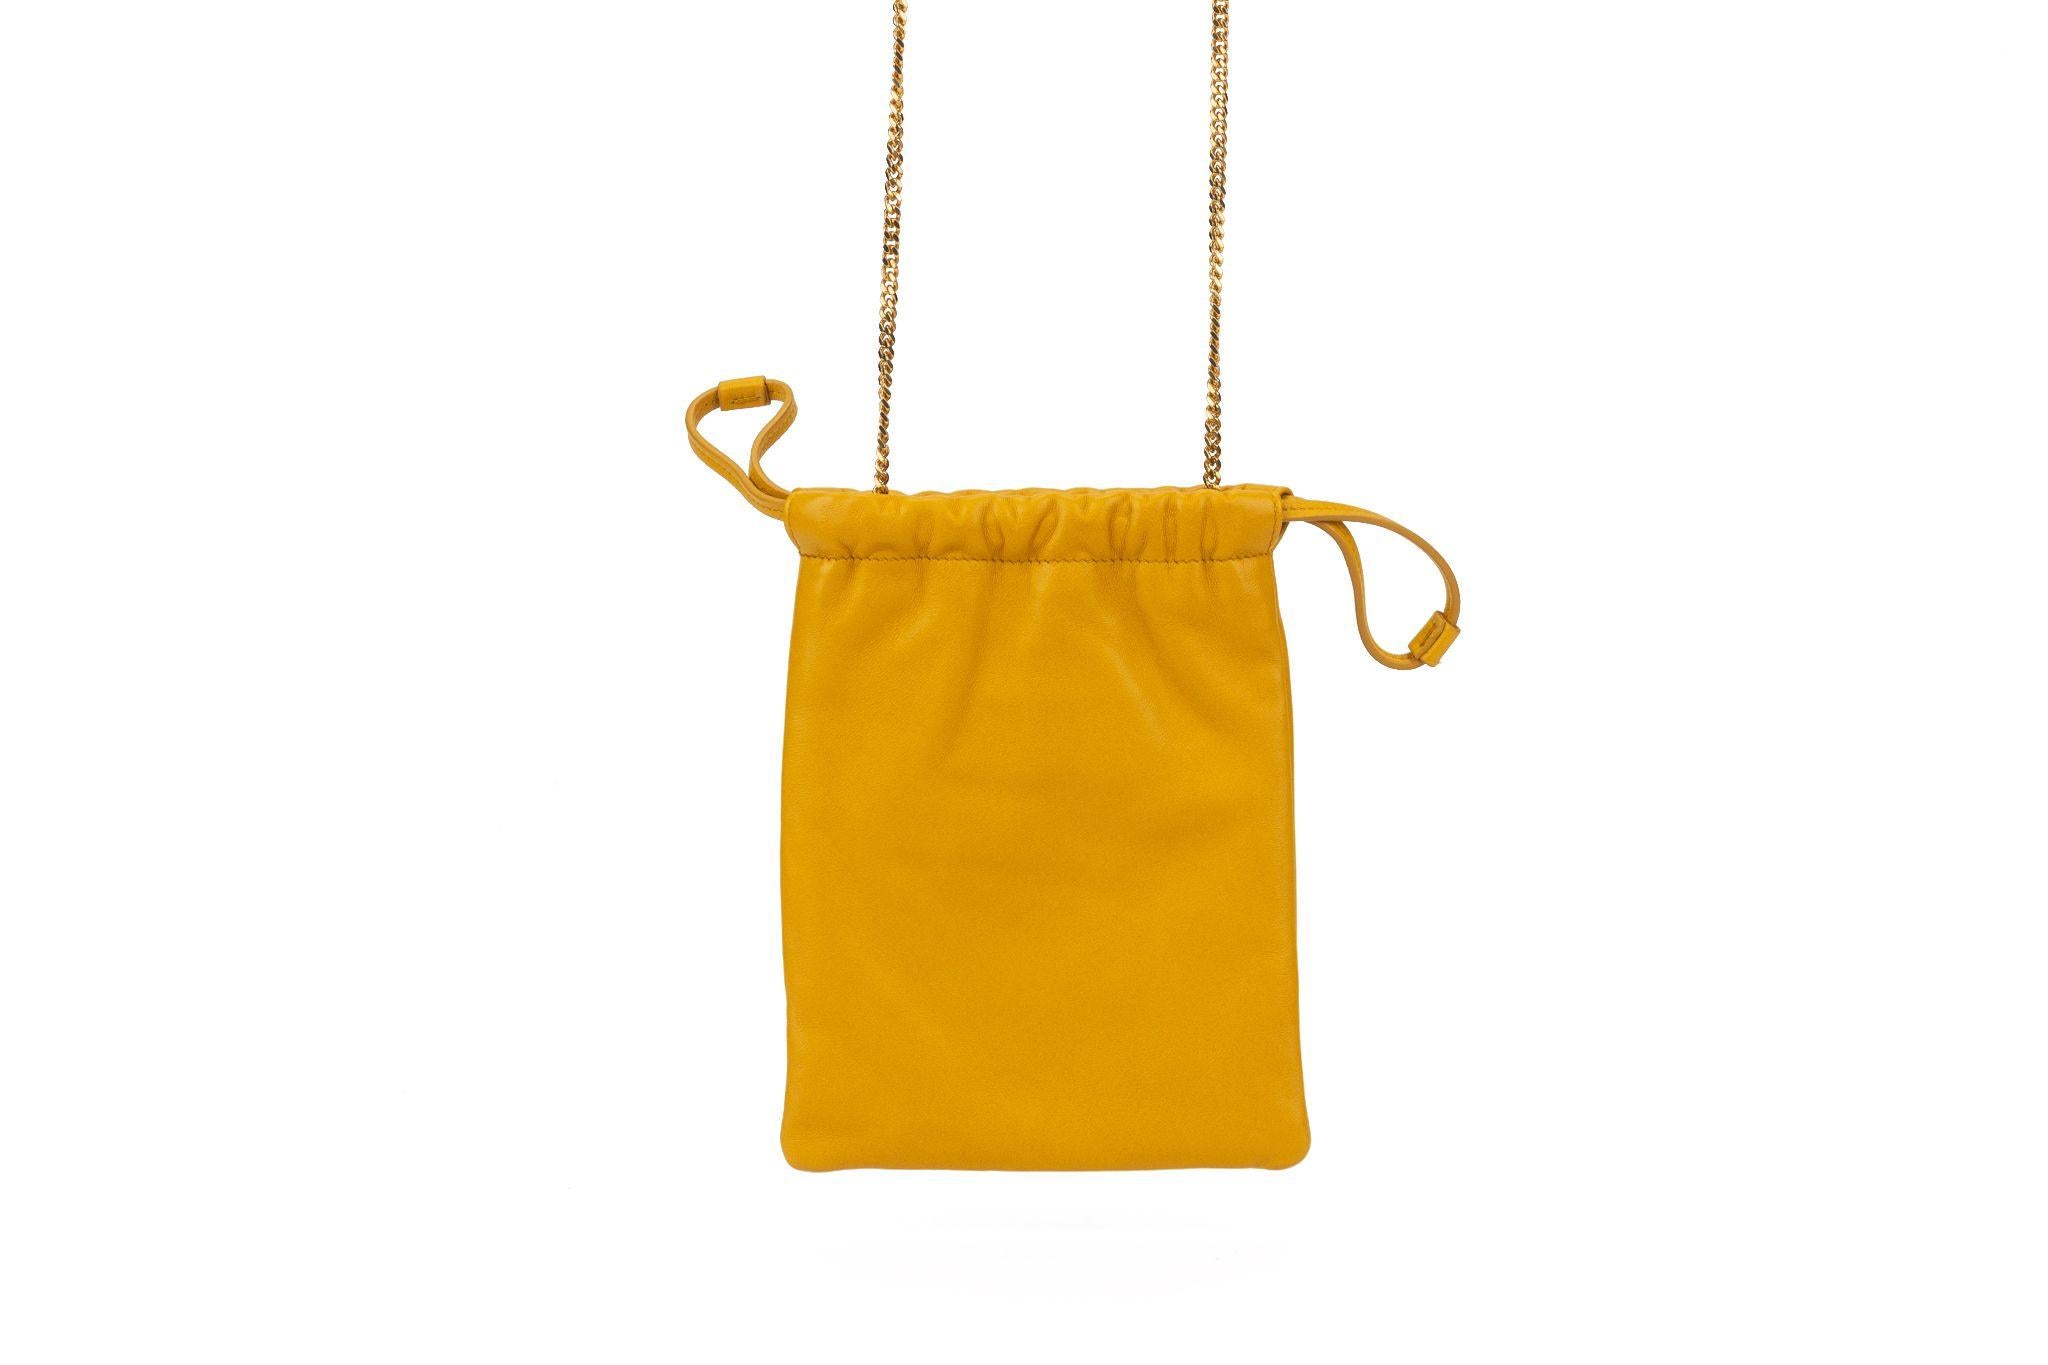 Saint Laurent lambskin bag in shade saffron with gold tone metal hardware chain. It has a drawstring closure and Saint Laurent printed on front. The black cotton interior comes with a brand tag and serial number. Shoulder drop 21.5”. The bag is new